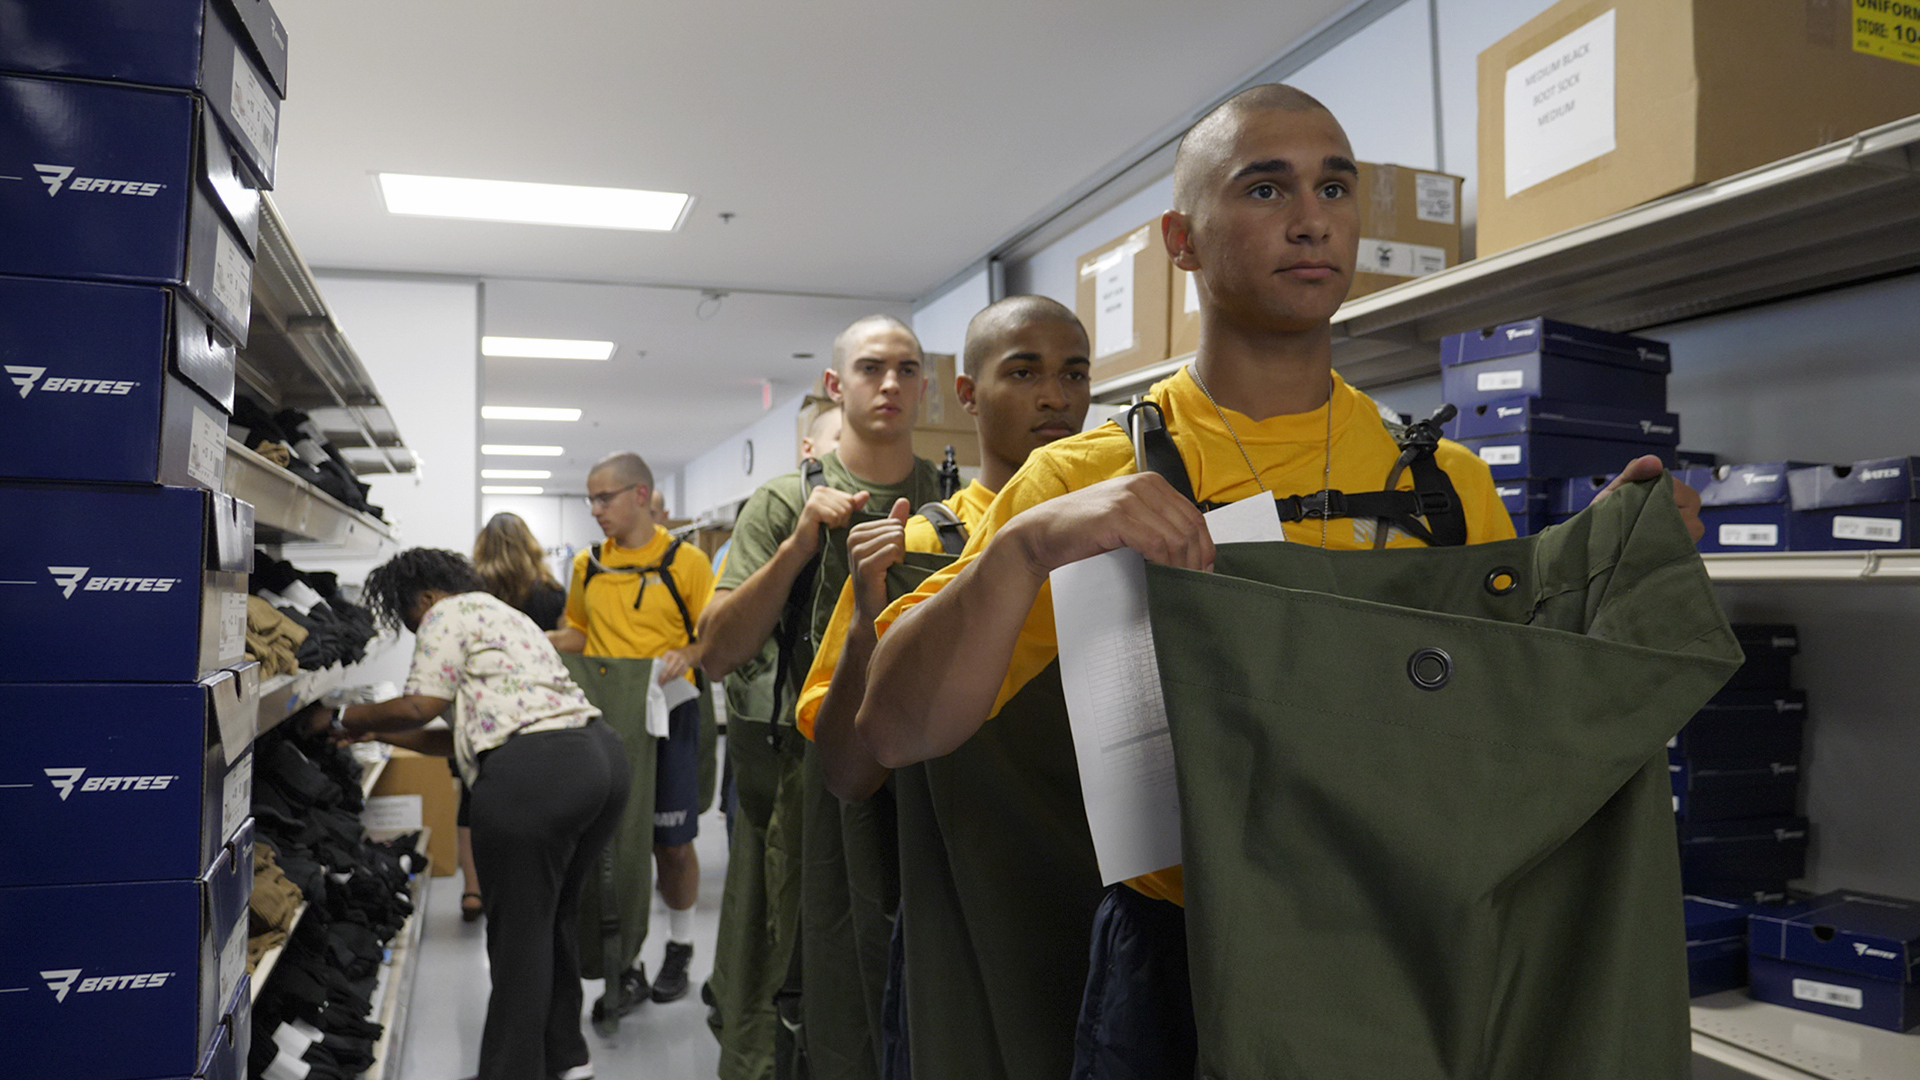 Soldiers selecting clothing from shelves